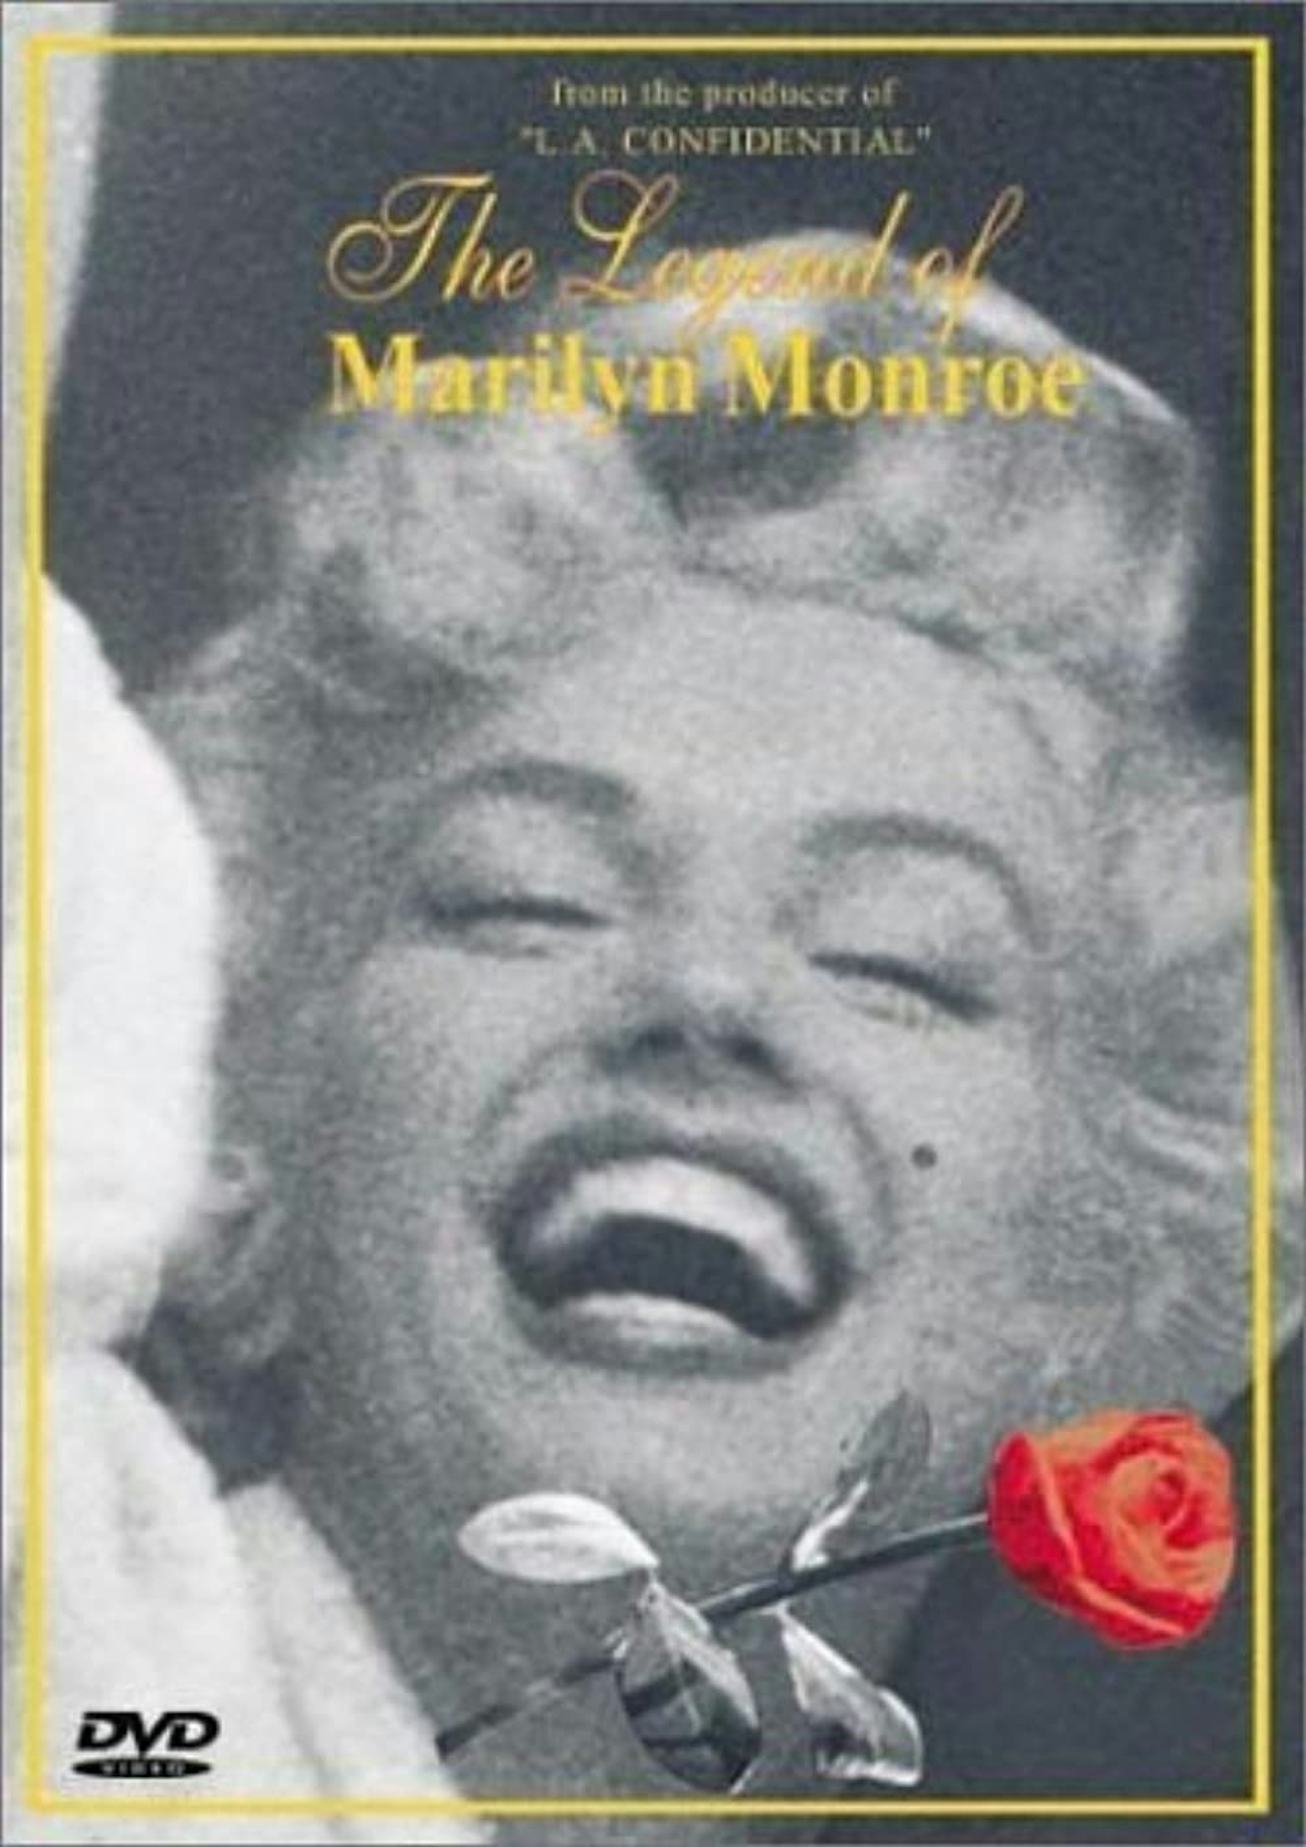 Legend Of Marilyn is one of the movies about Marilyn Monroe